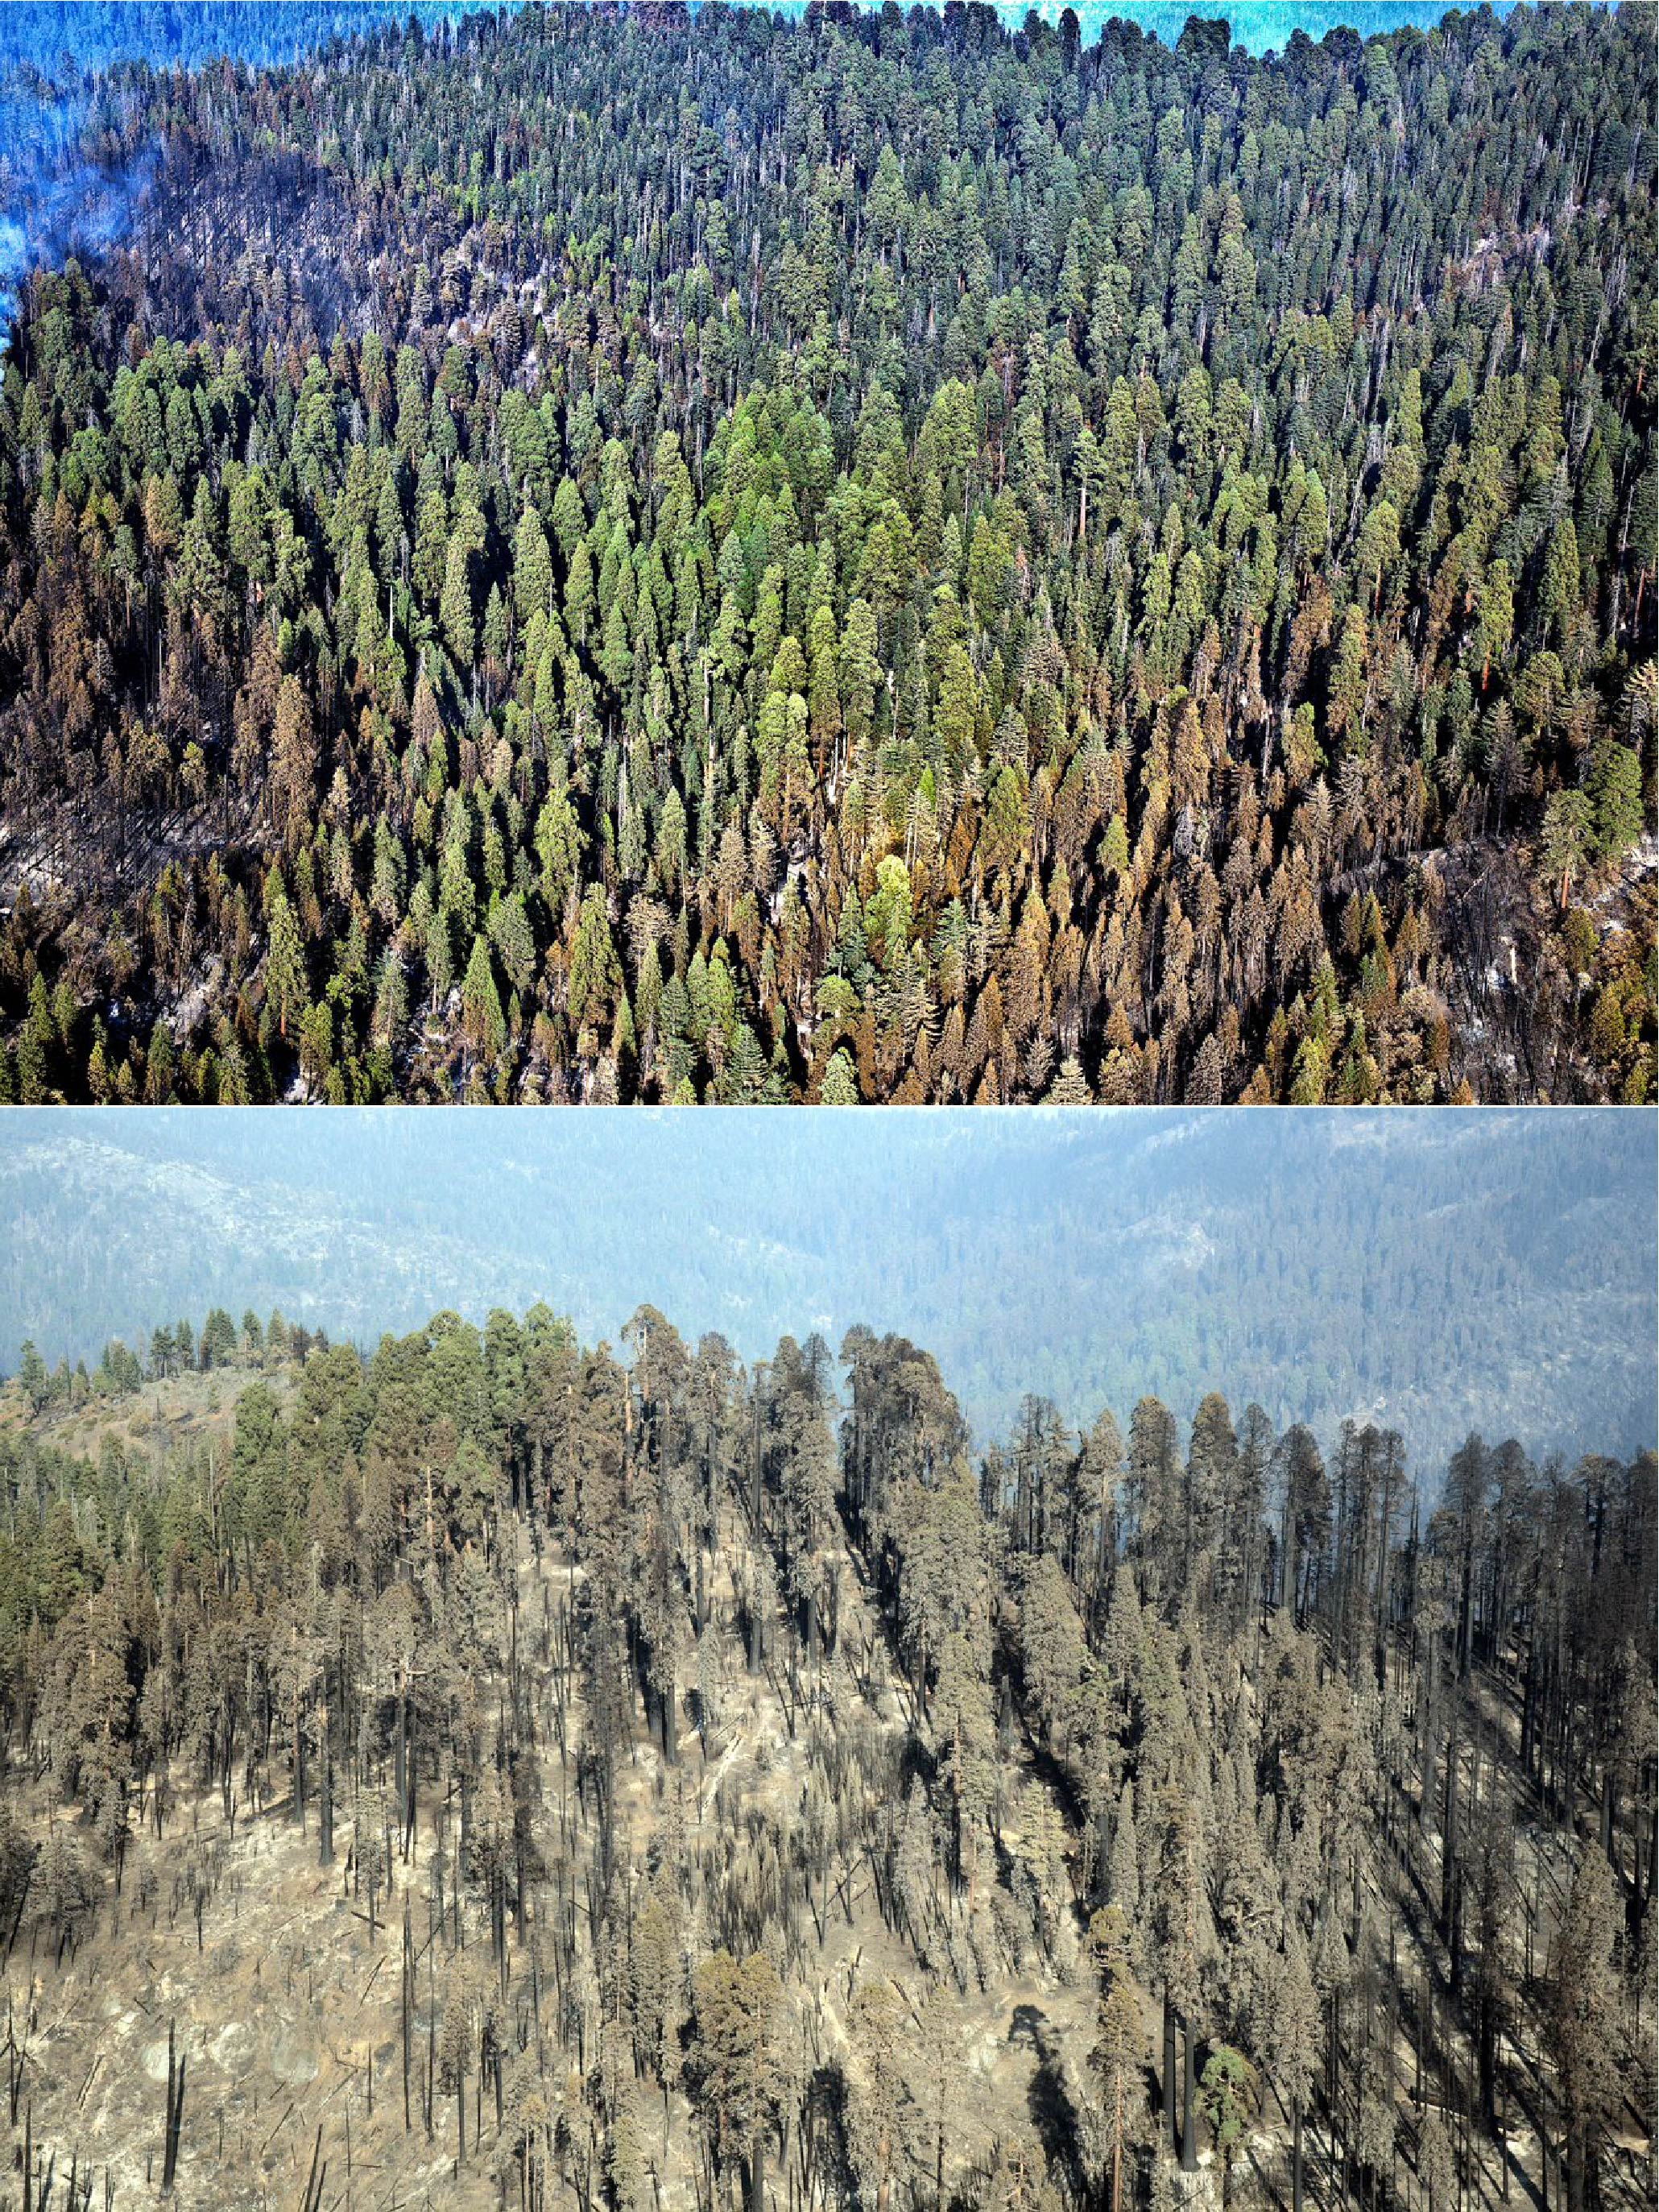 before and after a forest fire